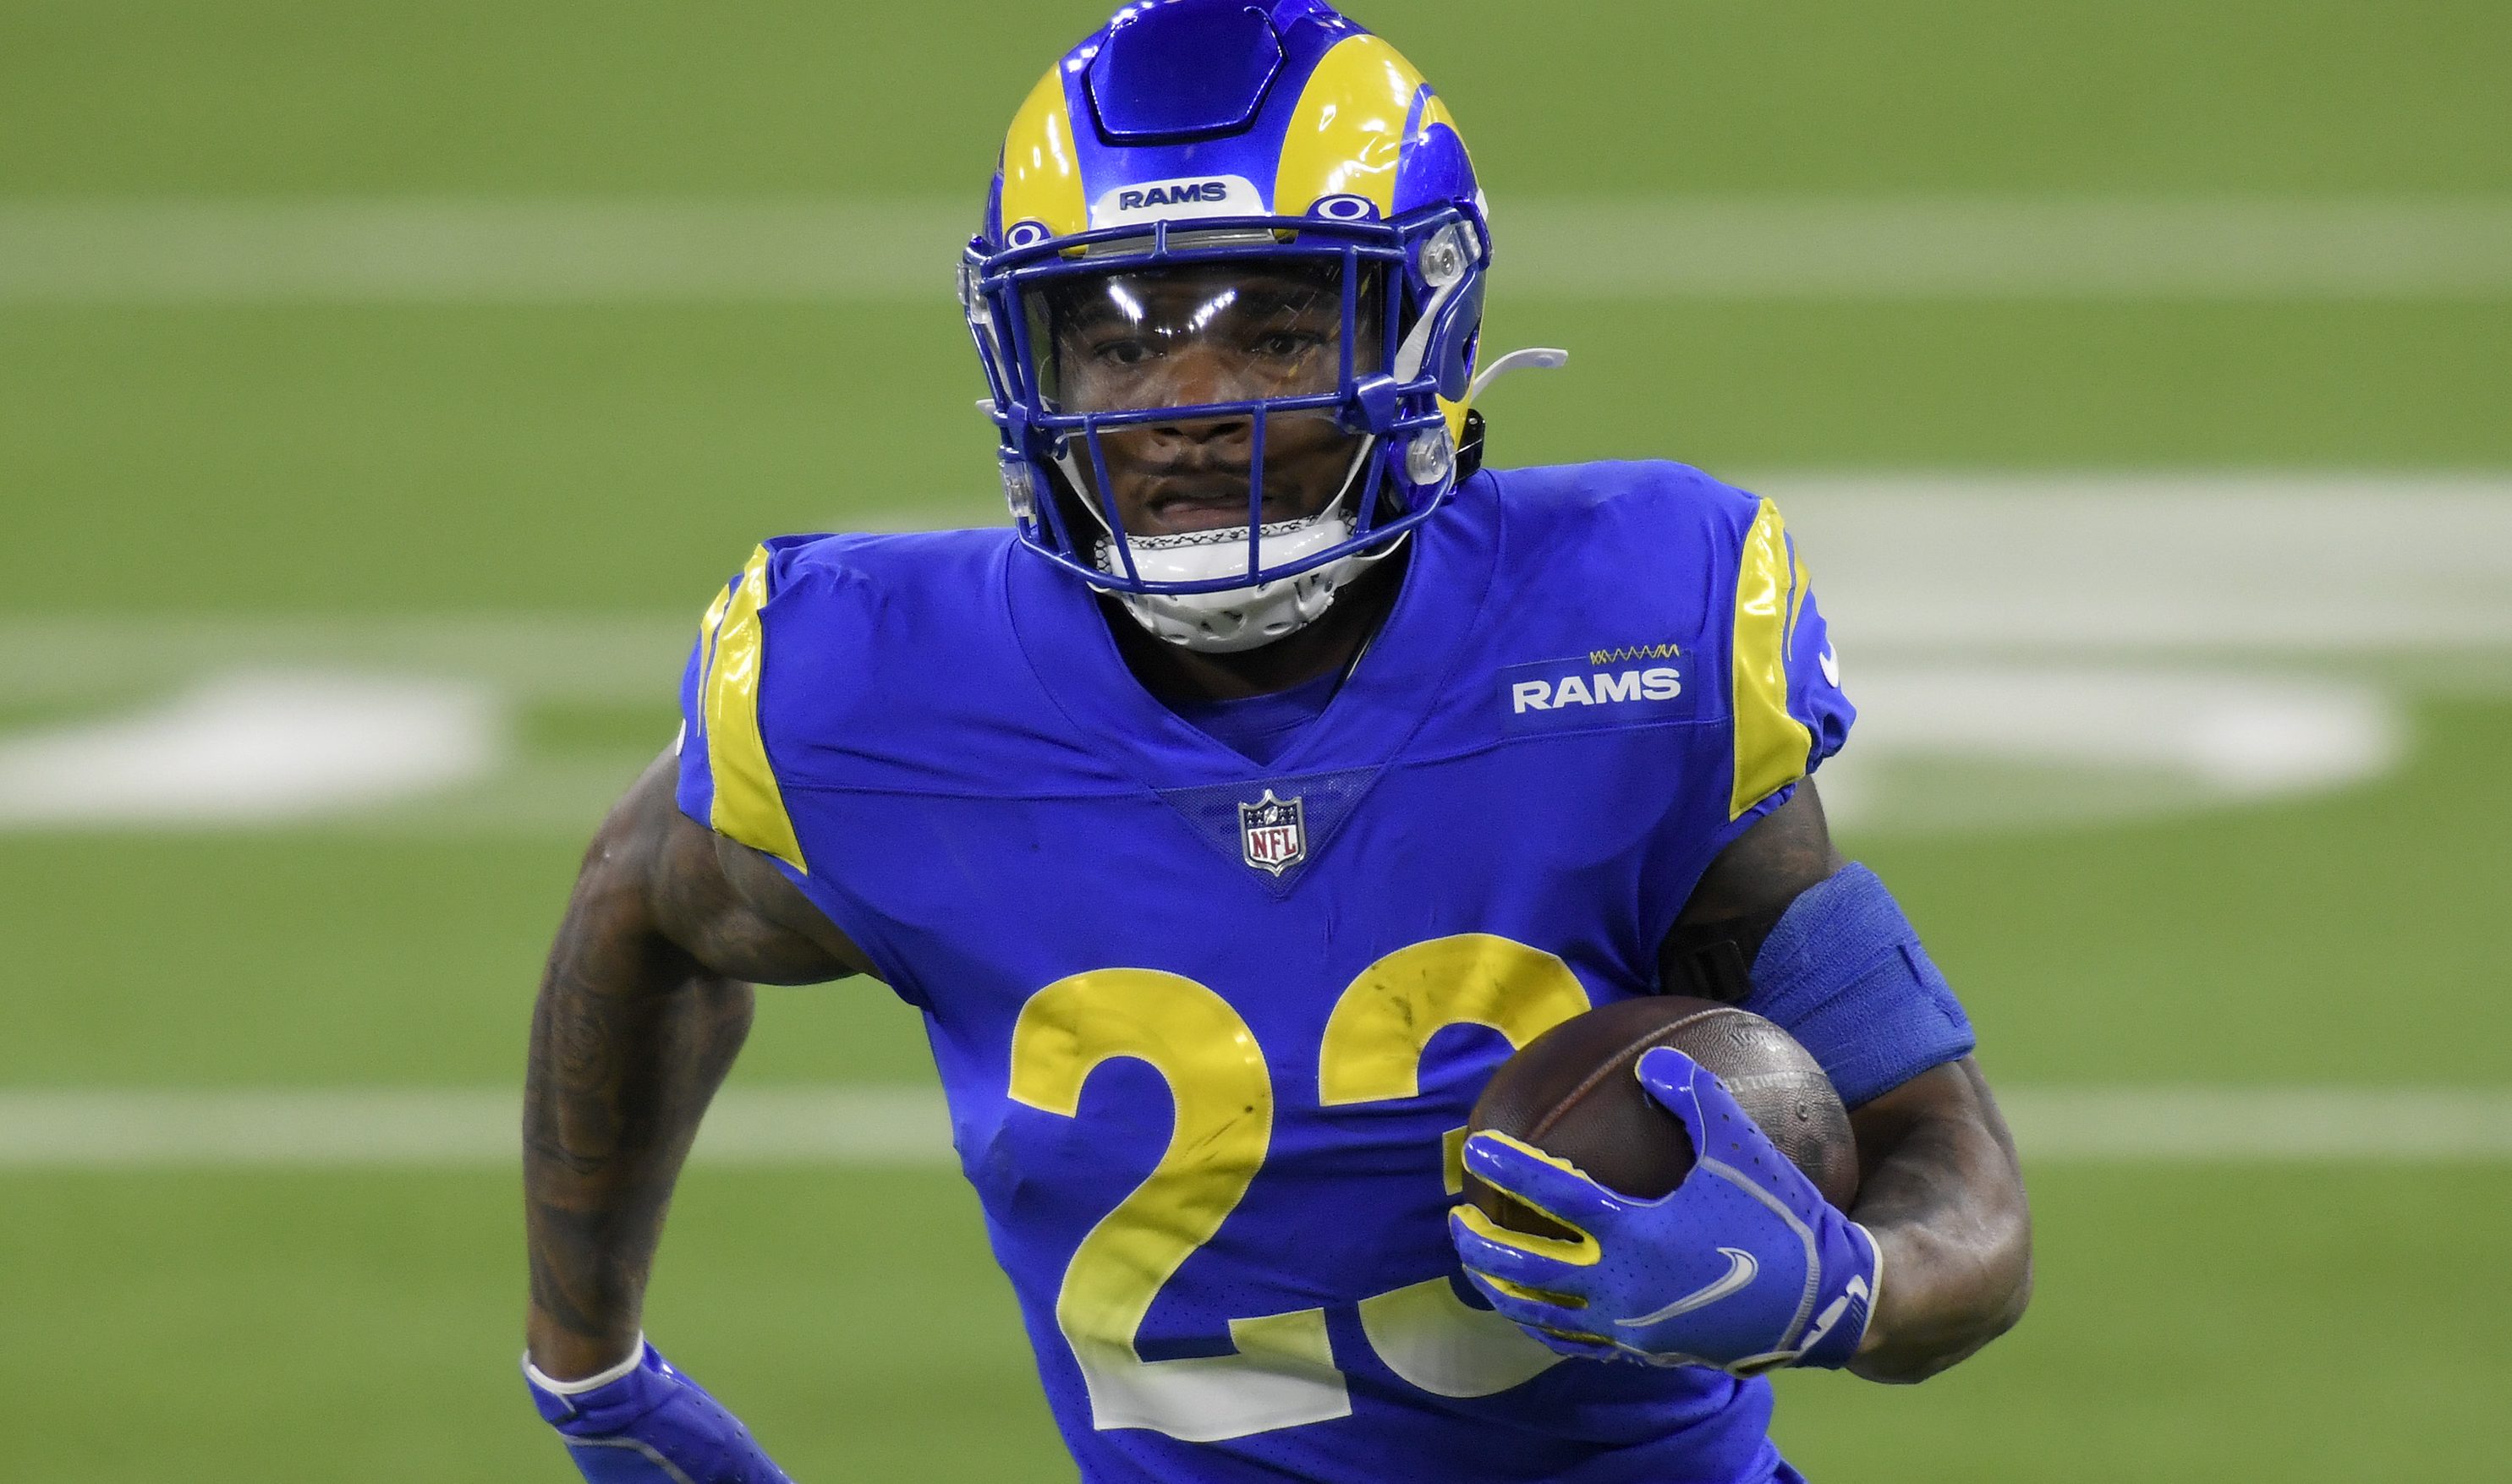 Rams Excited for Changes to Uniforms